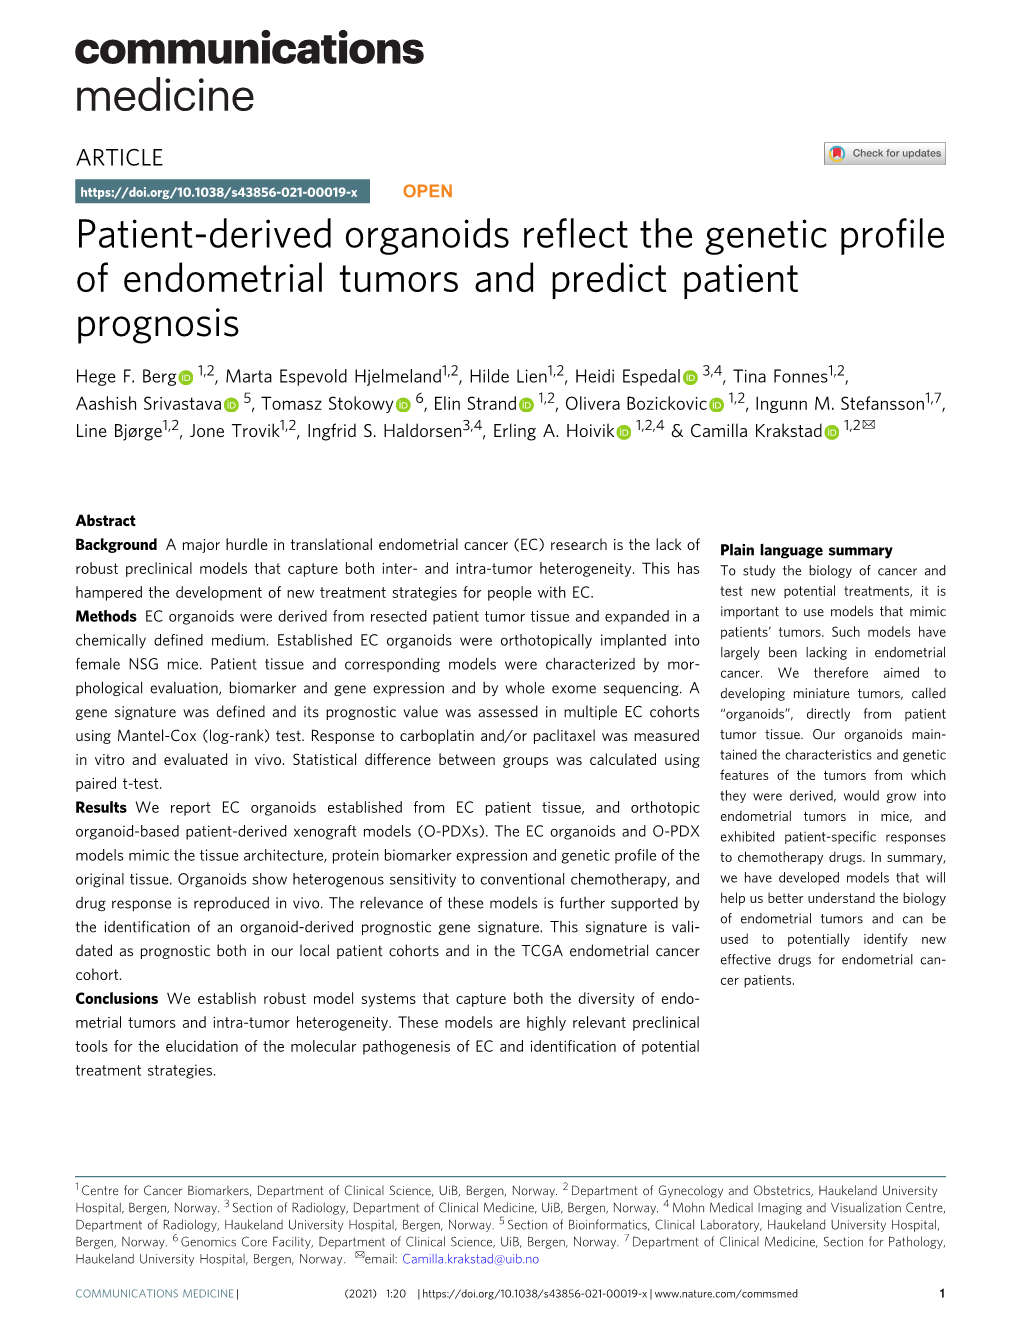 Patient-Derived Organoids Reflect the Genetic Profile of Endometrial